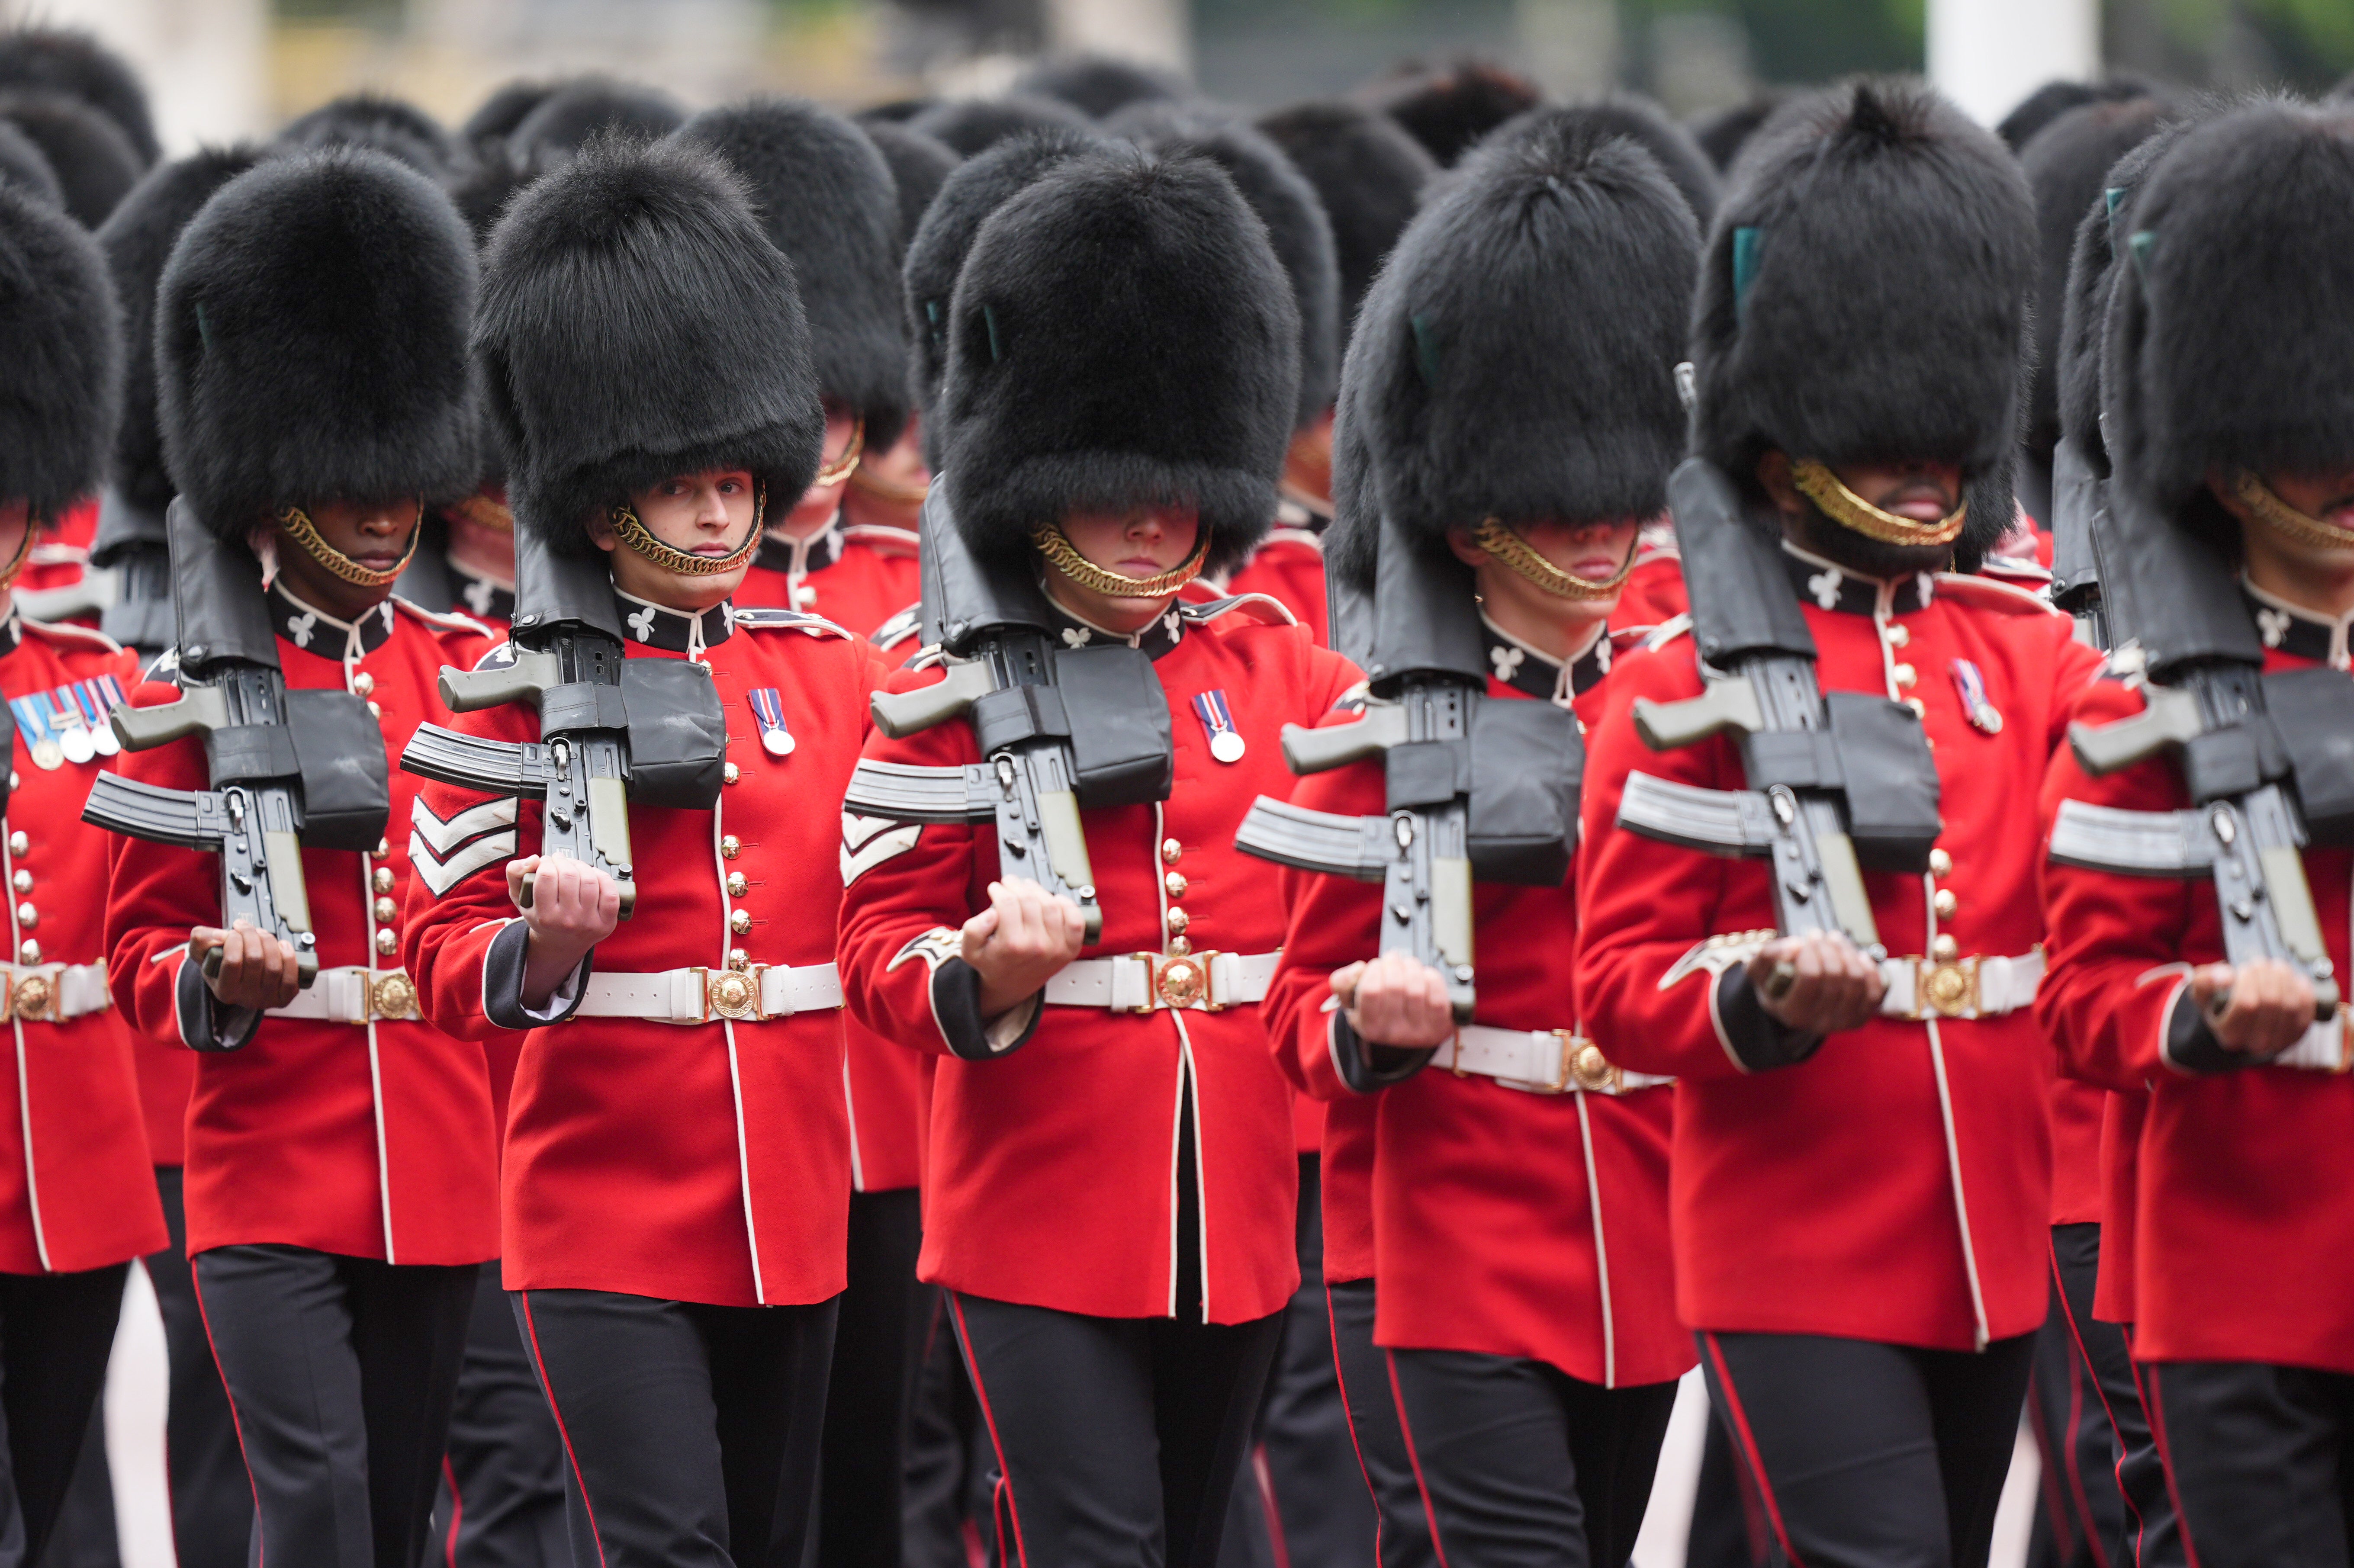 Members of the Irish Guards took part in the procession